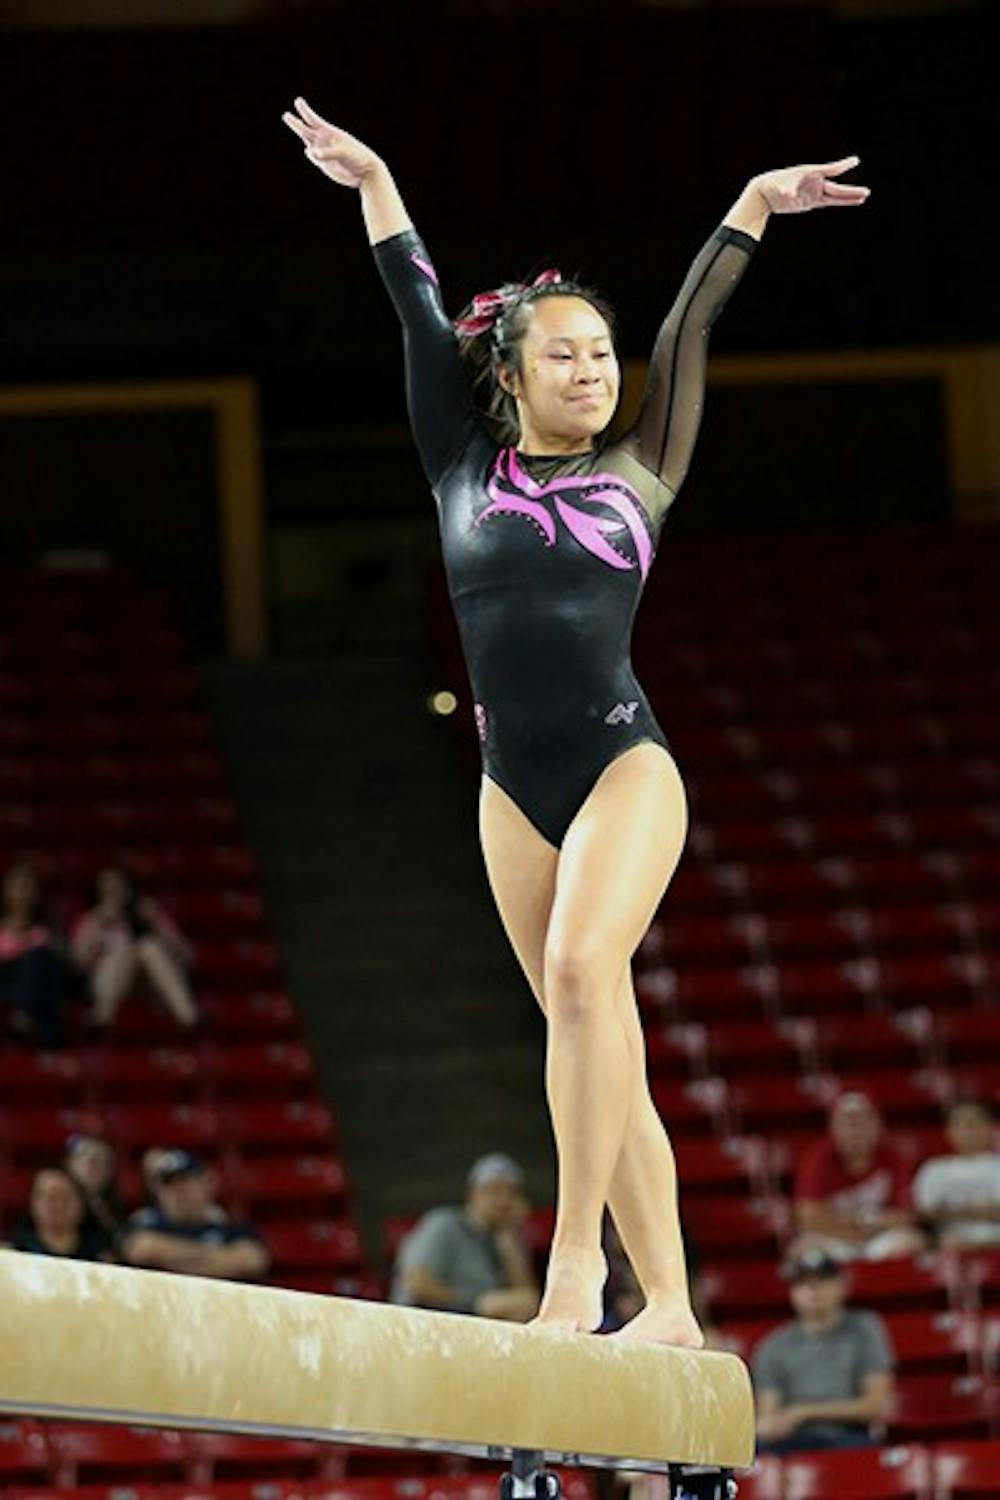 Freshman Gilly Hogue strikes a pose during her beam routine at a home meet on Feb. 15. Gilly returned after having sat out the last two weeks due to back spasms. (Photo Courtesy of Arianna Grainey)